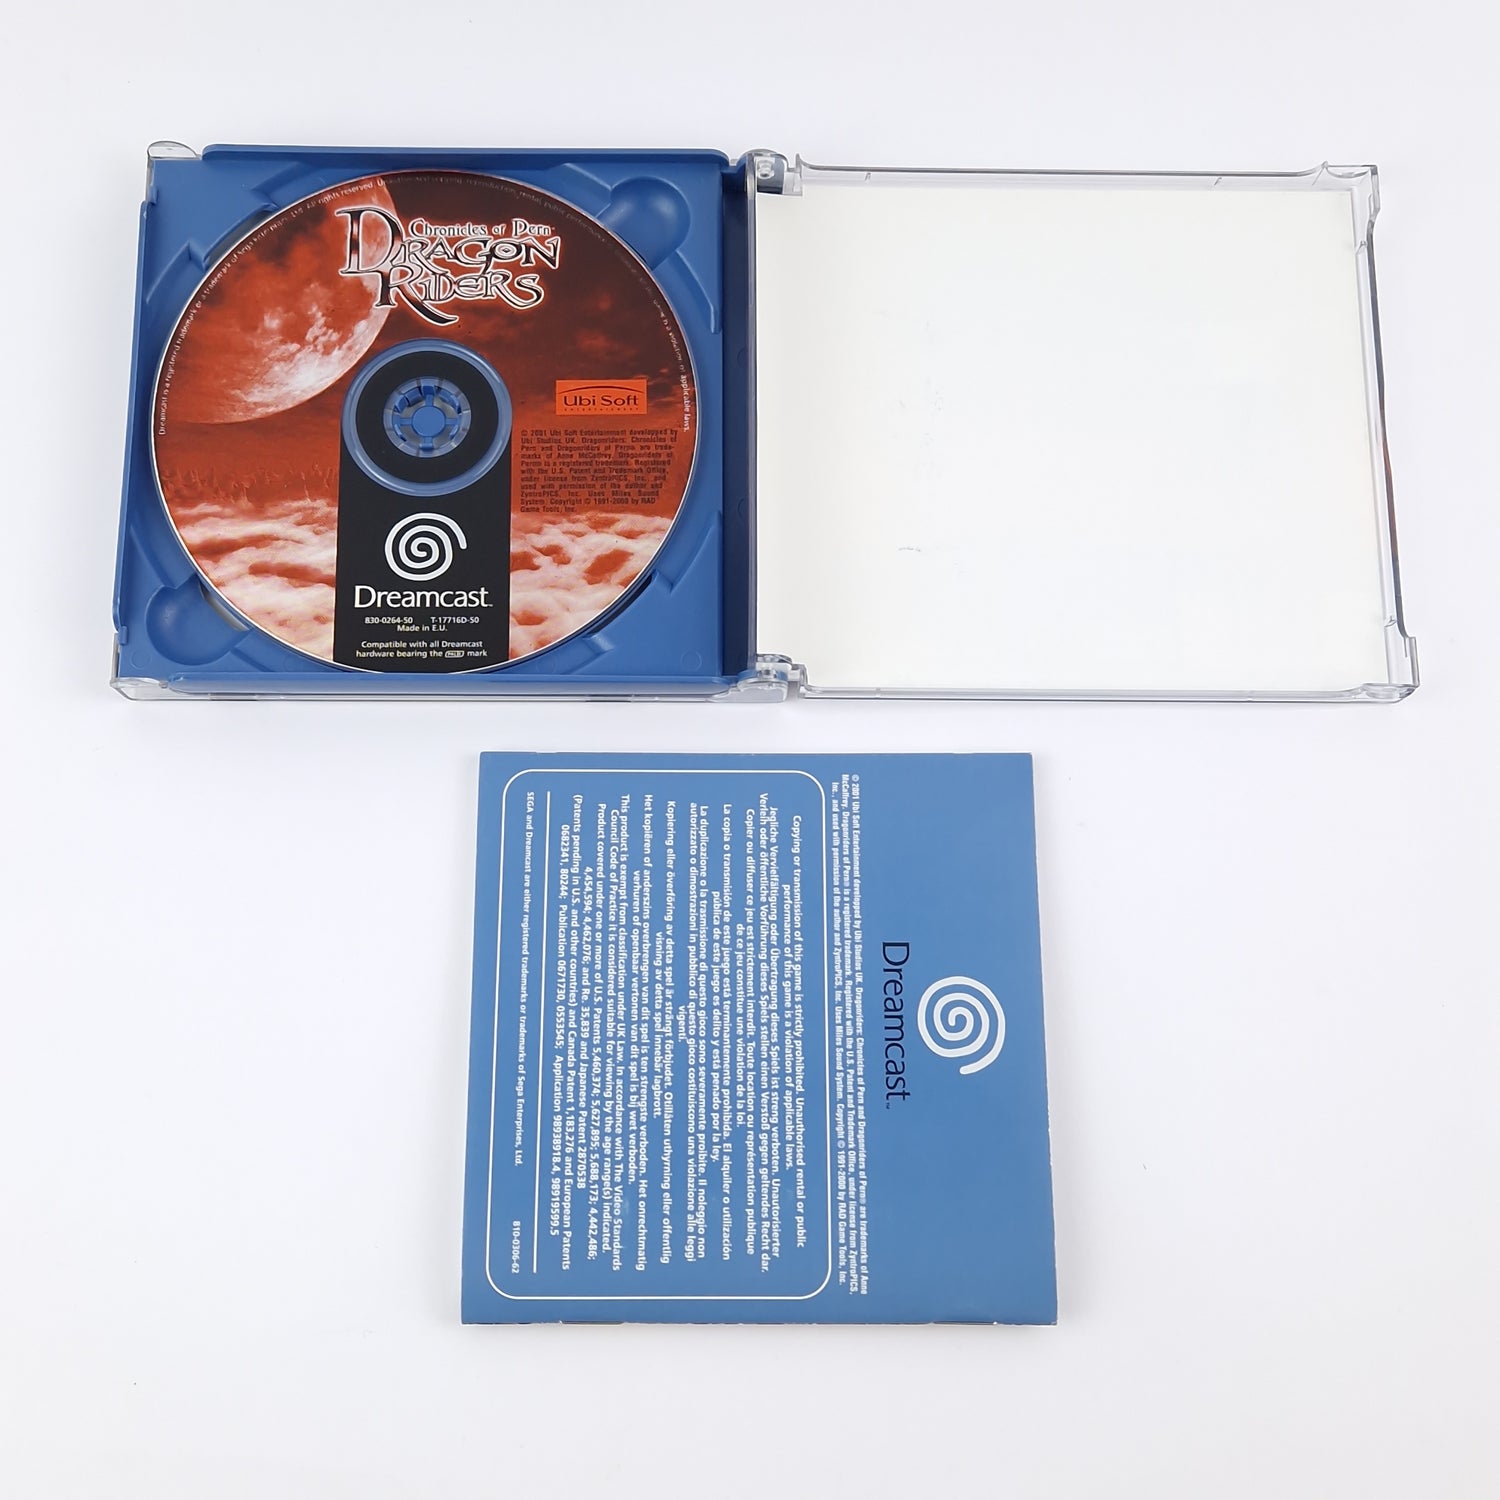 Sega Dreamcast Game: Chronicles of Pern Dragon Riders - OVP Instructions CD PAL